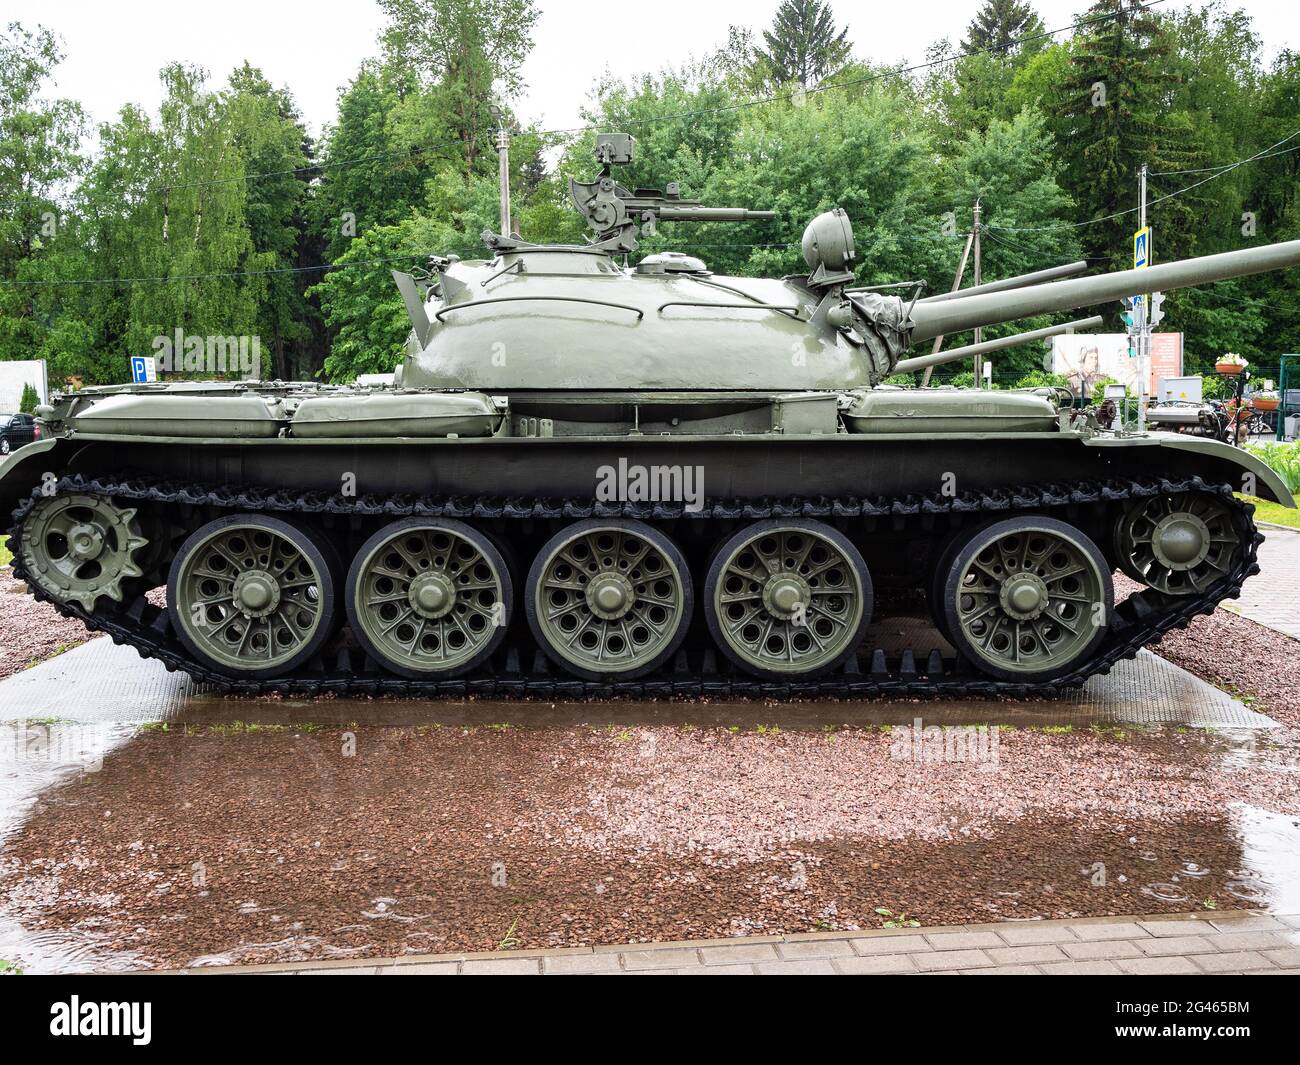 Sholohovo, Moscow Region, Russia - June 8, 2021: side view of tank at outdoor area of Museum of History of the T-34 Tank. Founder of the museum is Vas Stock Photo